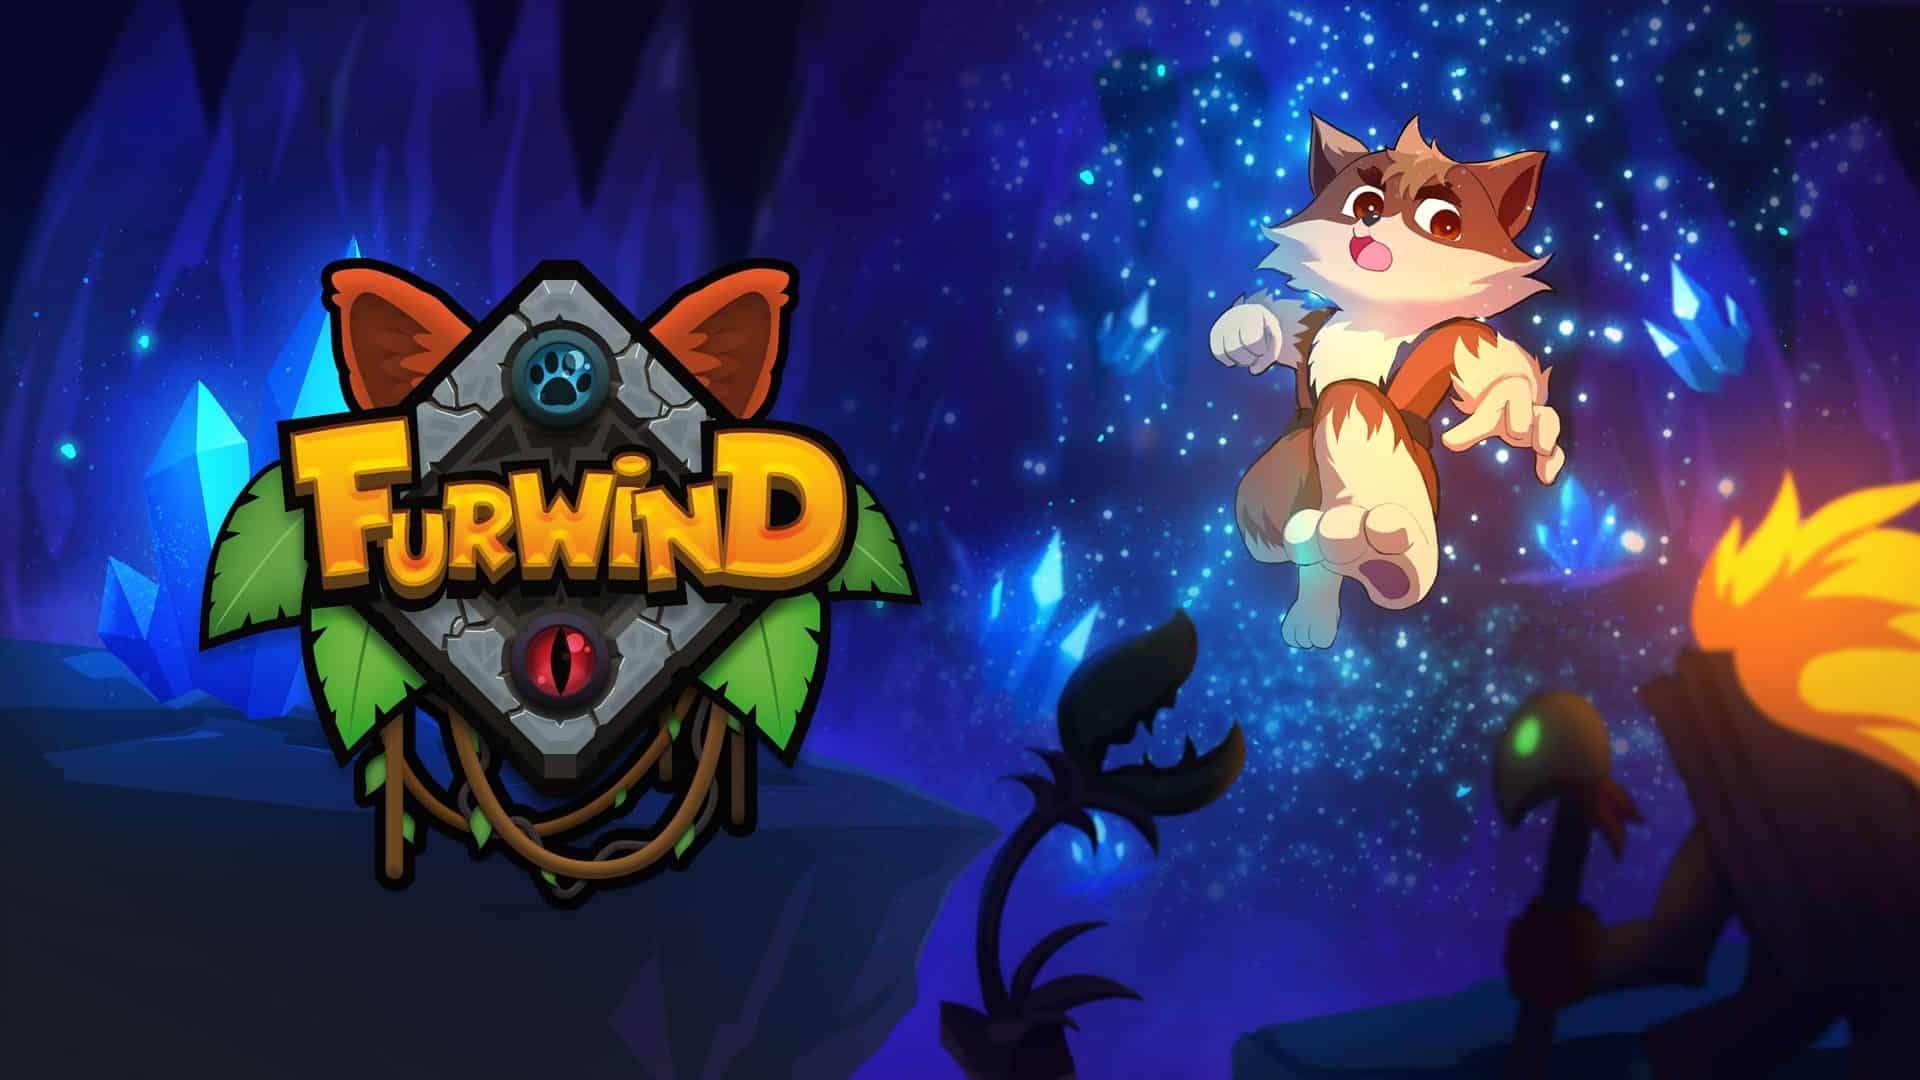 Furwind – Available Now For PS4, PSVITA And Nintendo Switch